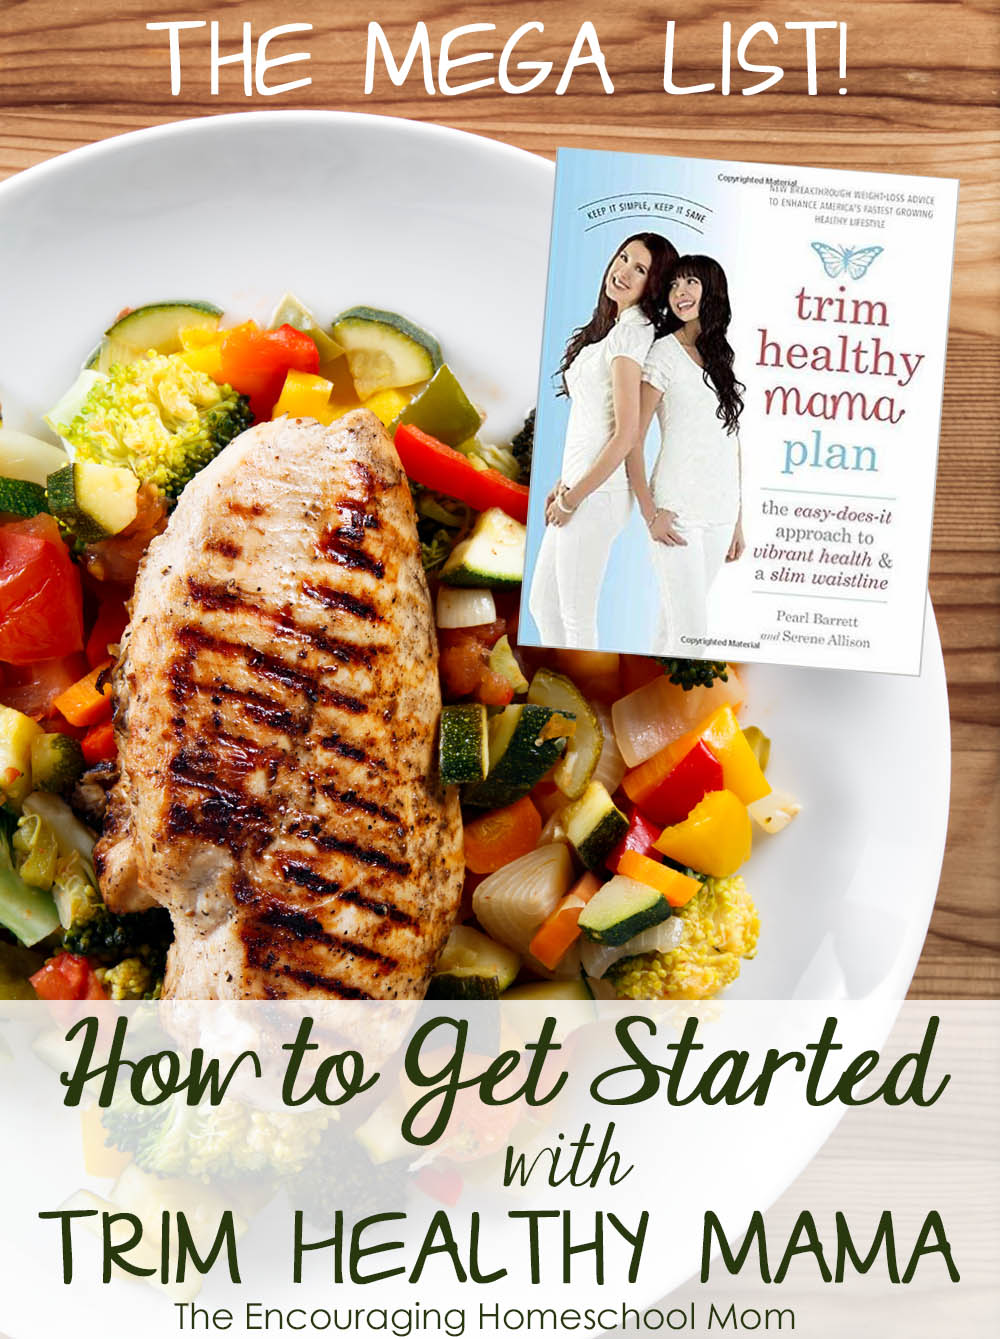 https://largefamilytable.com/trim-healthy-mama-weight-loss-my-top-tips-to-help-you-get-started/